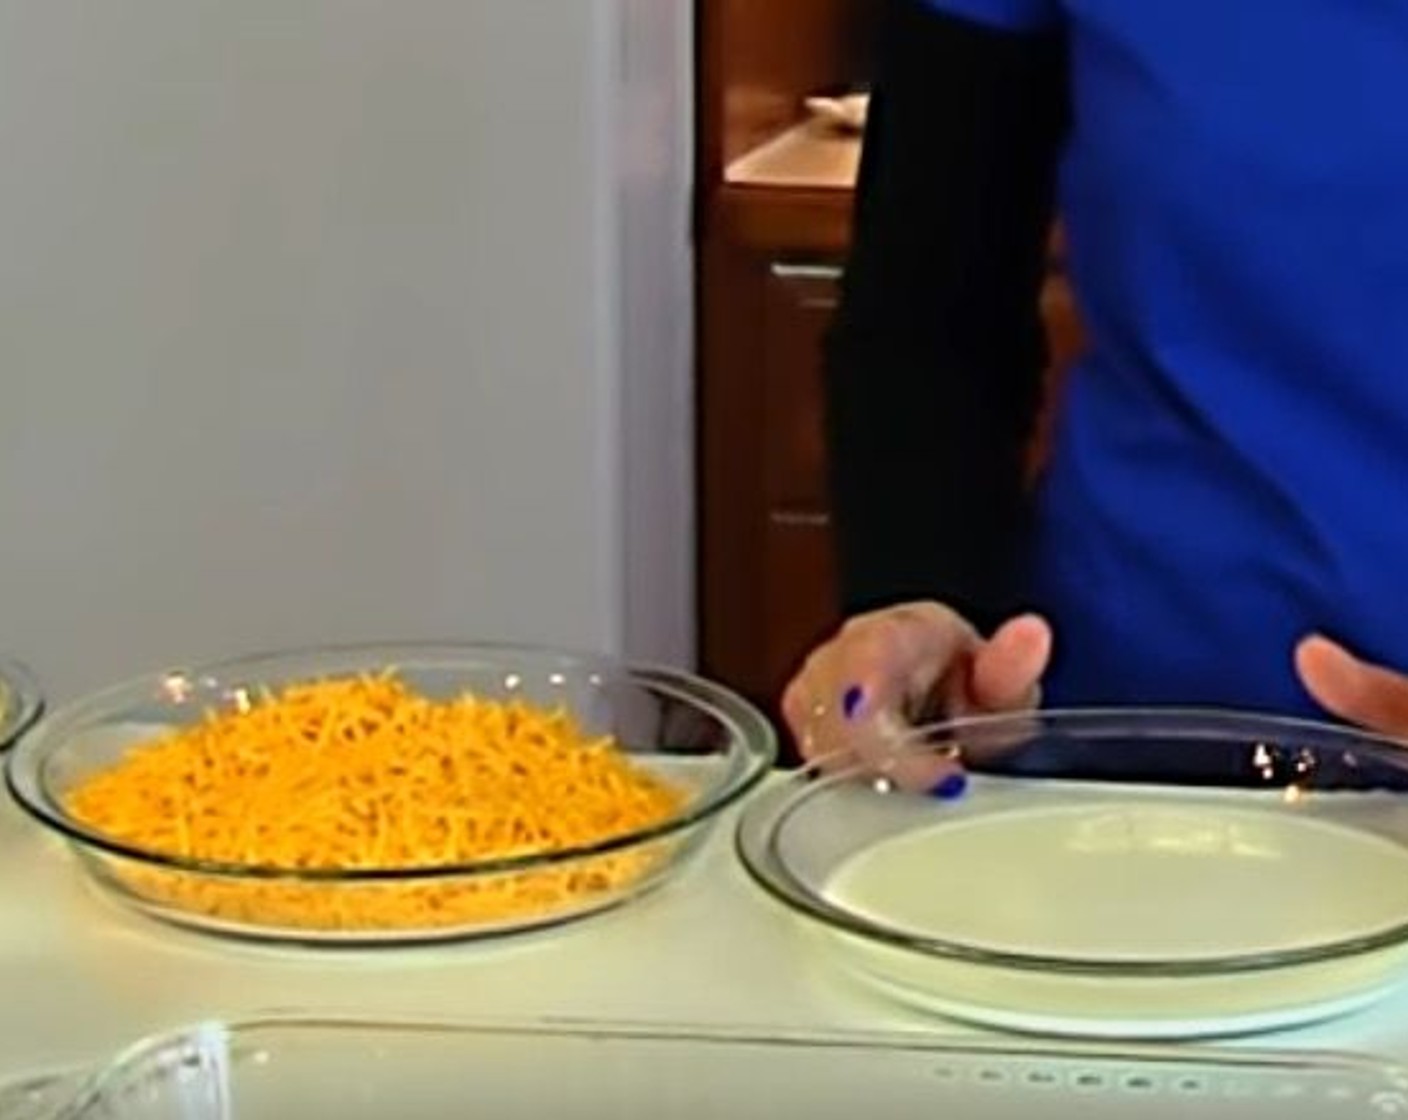 step 2 Pour the Milk (1/2 cup), Shredded Cheddar Cheese (2 cups), and Ritz® Crackers (1 1/2 pckg) into three separate shallow pans or dishes. Stir the Salt (1/4 tsp), Freshly Ground Black Pepper (1/8 tsp), and Dried Parsley (1 tsp) into the Ritz cracker crumbs.